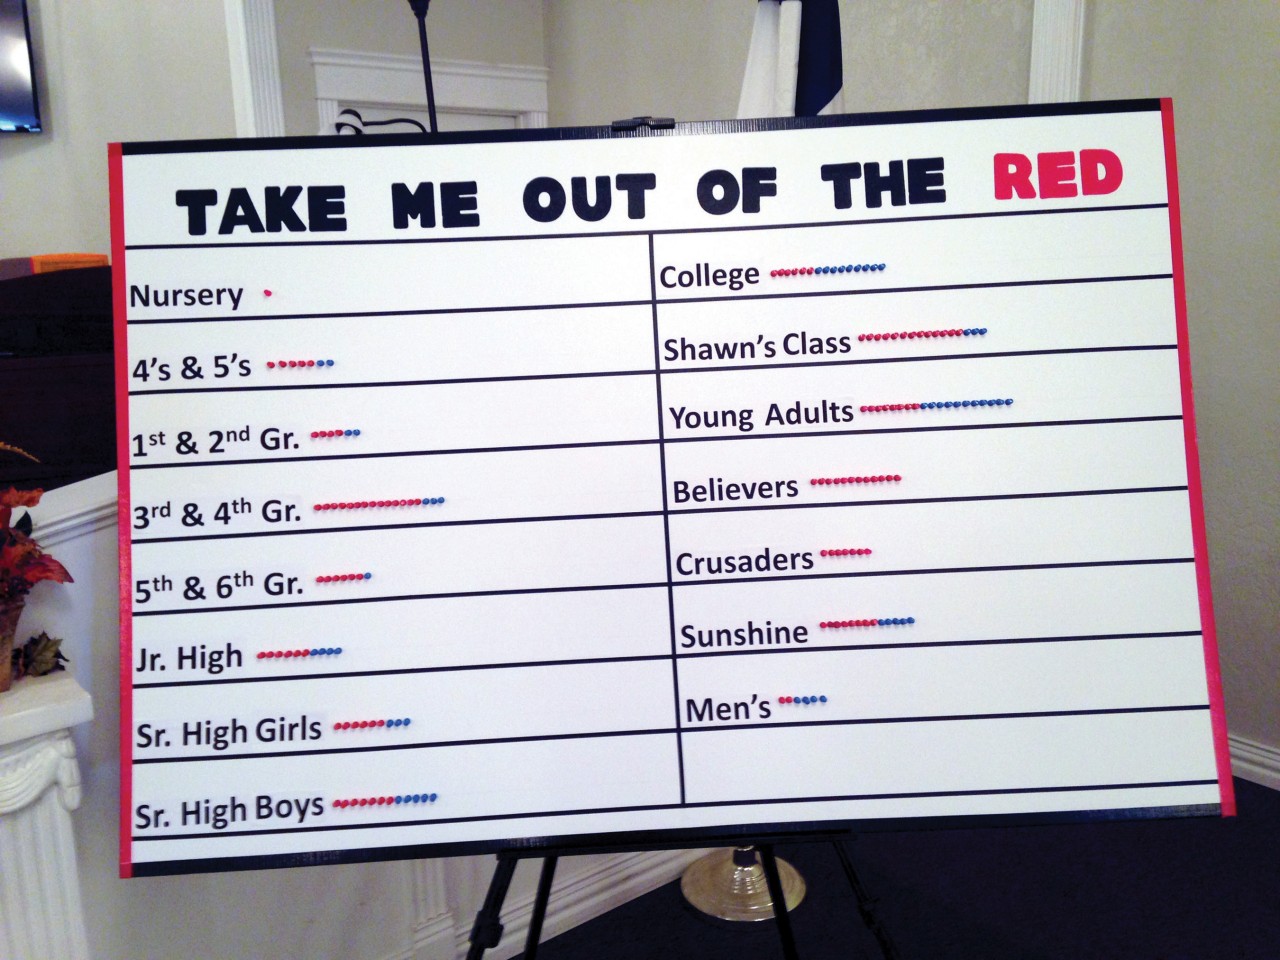 Take Me Out of the Red campaign board reflects the impact the revival week had on Sunday School classes